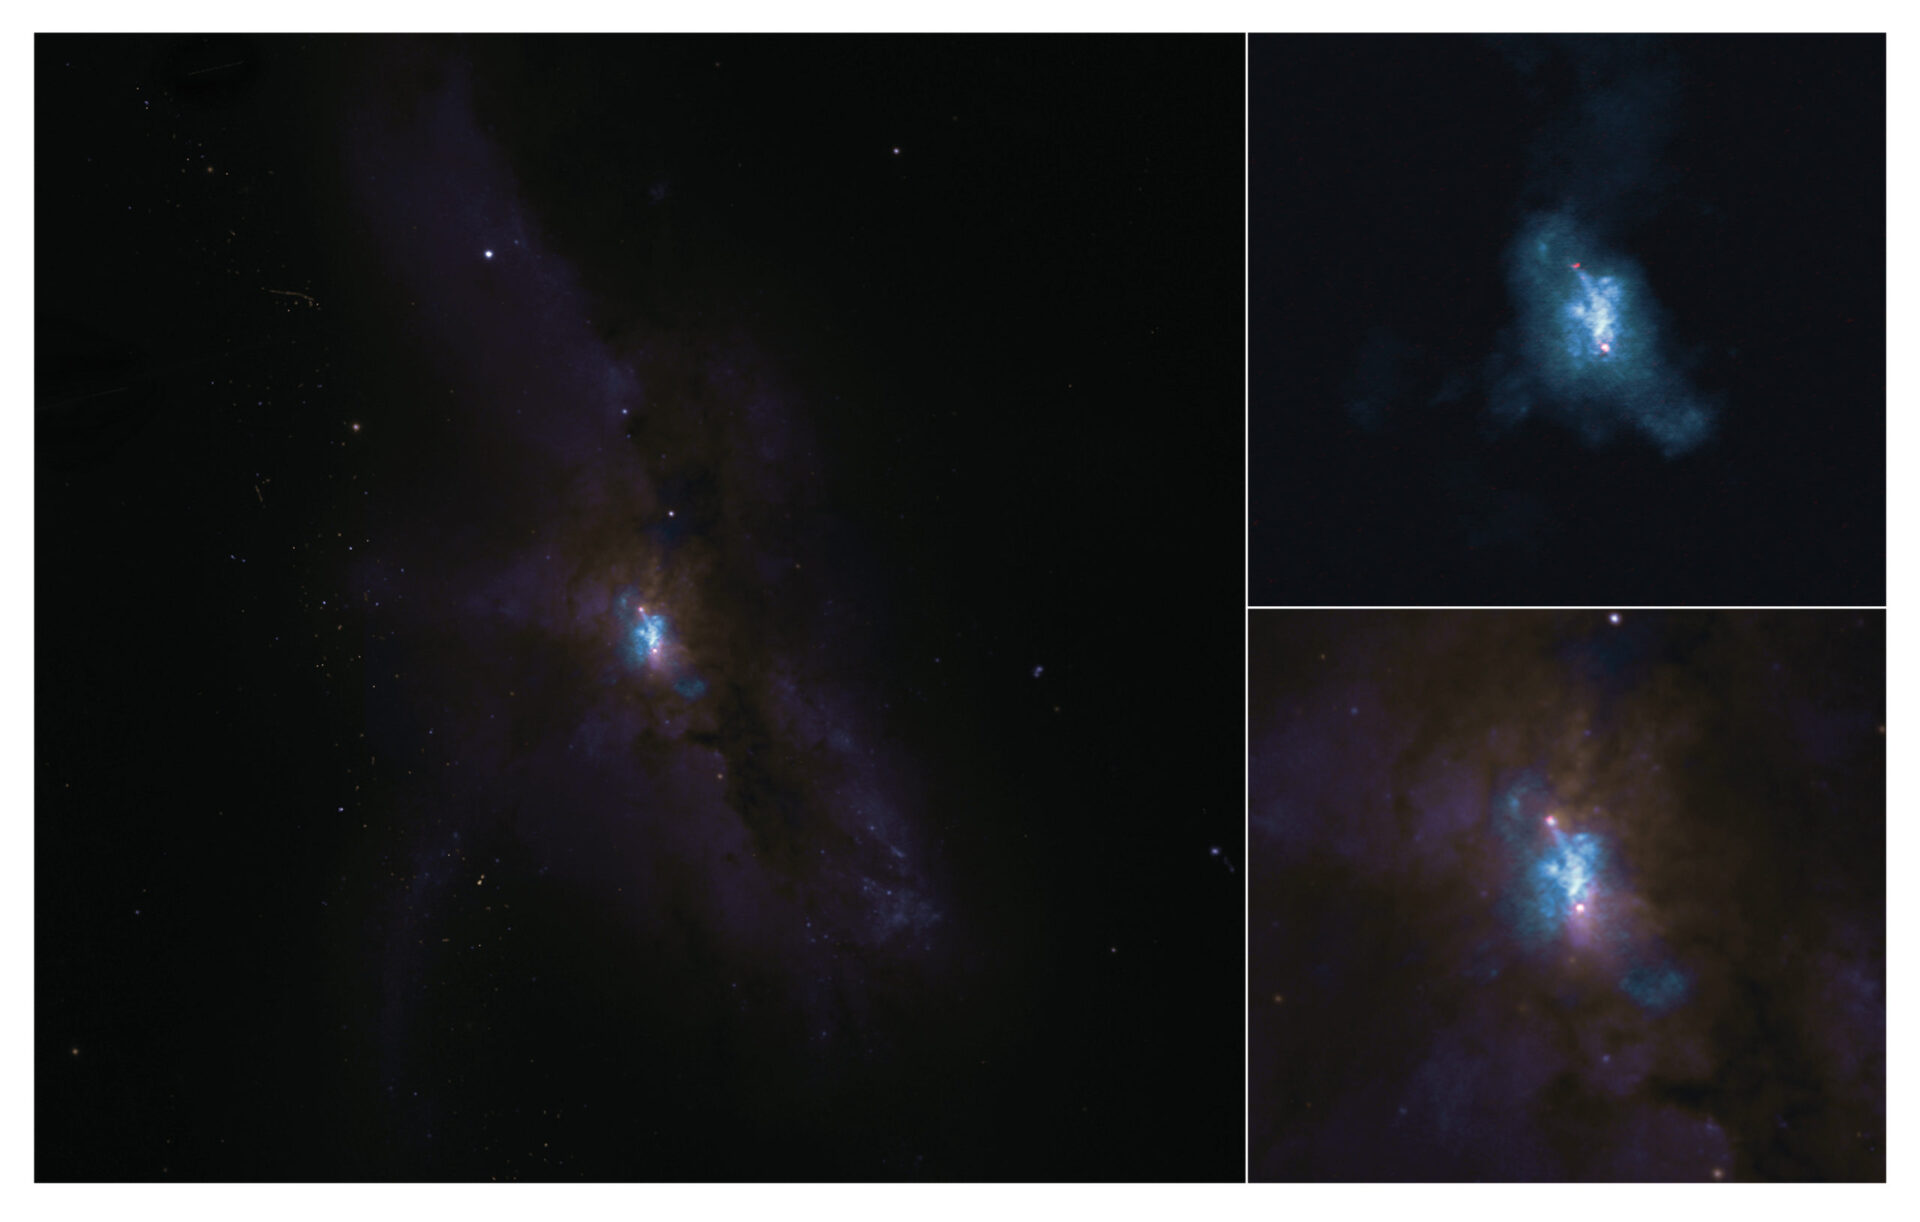 NGC 6240 as seen with ALMA (top) and the Hubble Space Telescope (bottom). In the ALMA image, the molecular gas is blue and the black holes are the red dots. The ALMA image provides the sharpest view of the molecular gas around the black holes in this merging galaxy. Credit: ALMA (ESO/NAOJ/NRAO), E. Treister; NRAO/AUI/NSF, S. Dagnello; NASA/ESA Hubble